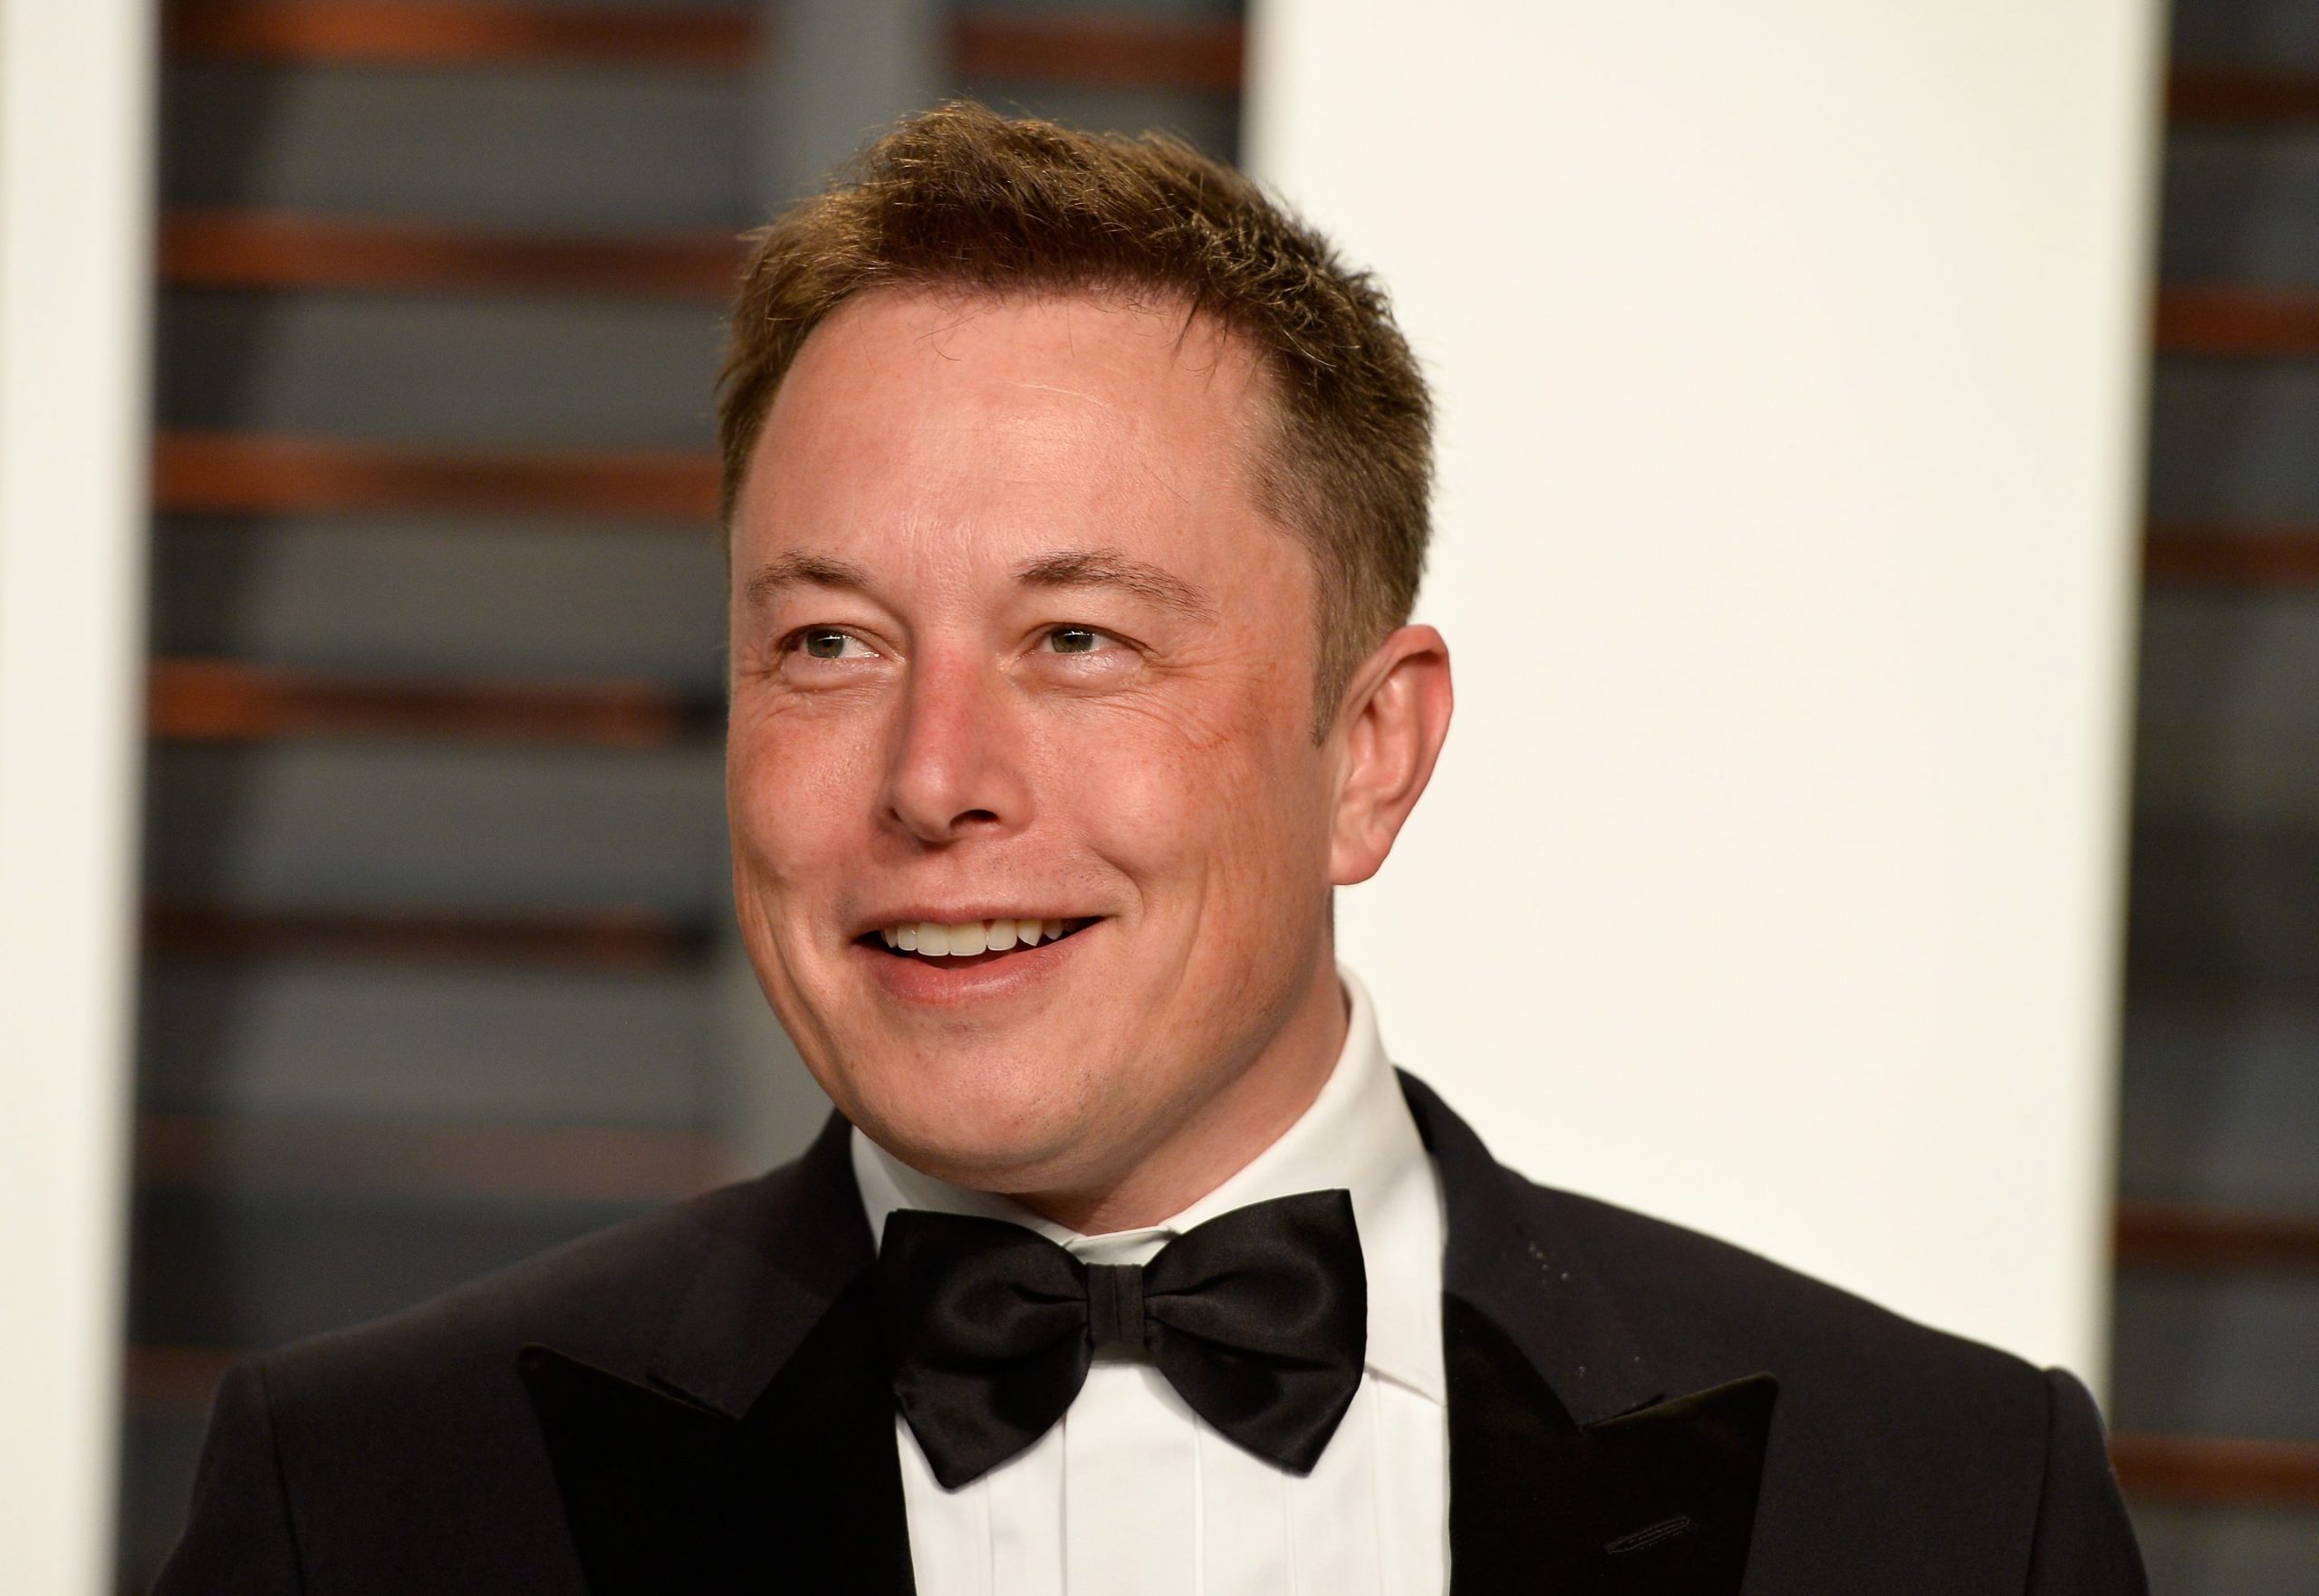 Where Elon Musk's Twitter takeover ranks in the biggest tech acquisitions in history